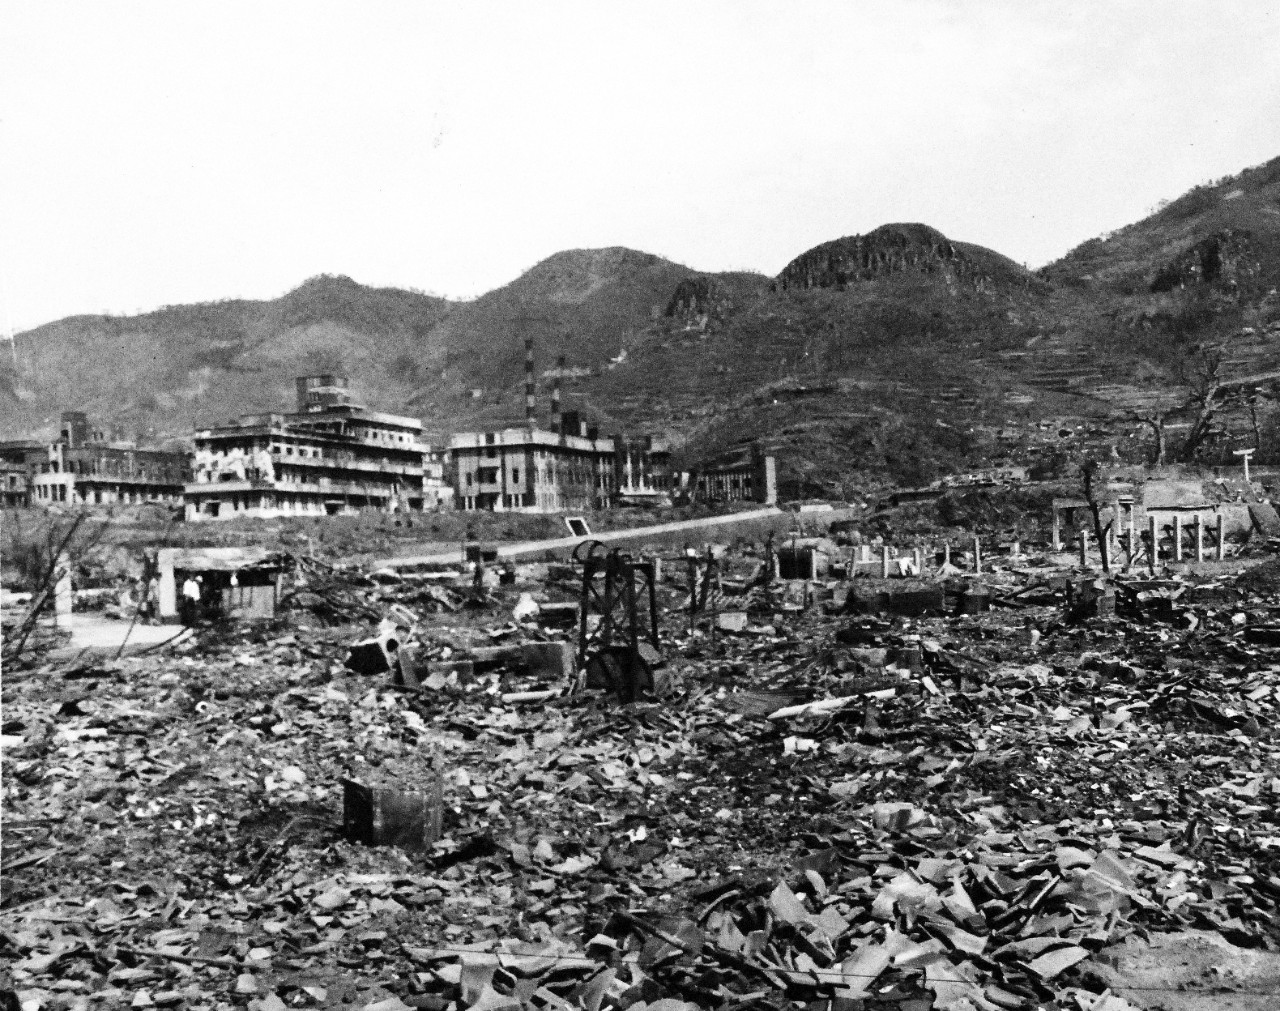 80-G-264911:   Nagasaki, Japan, 1945.   View of the bomb damage from August 9, 1945.  Altitude of 300’.  Photographed by USS Chenango (CVE-28) aircraft on October 15, 1945.  Official U.S. Navy photograph, now in the collections of the National Archives.   (2015/12/01).